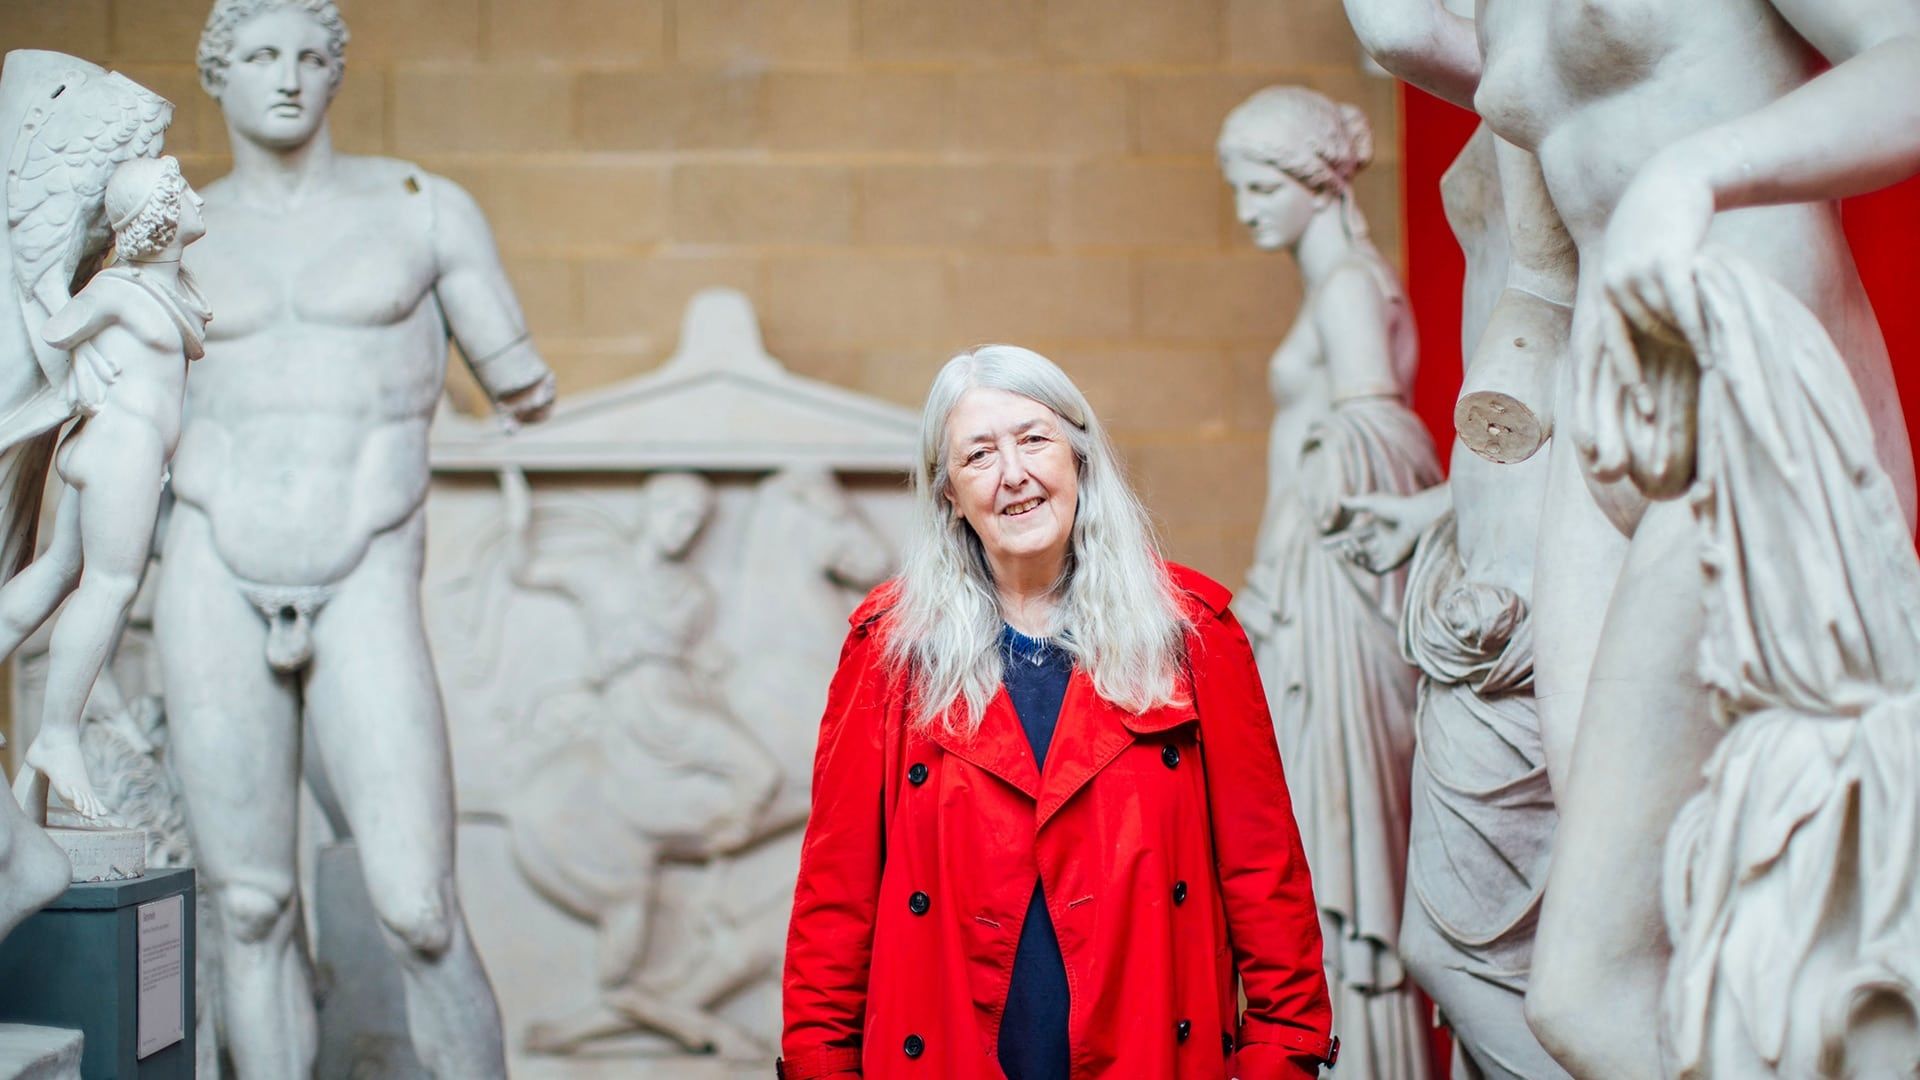 Mary Beard's Shock of the Nude background